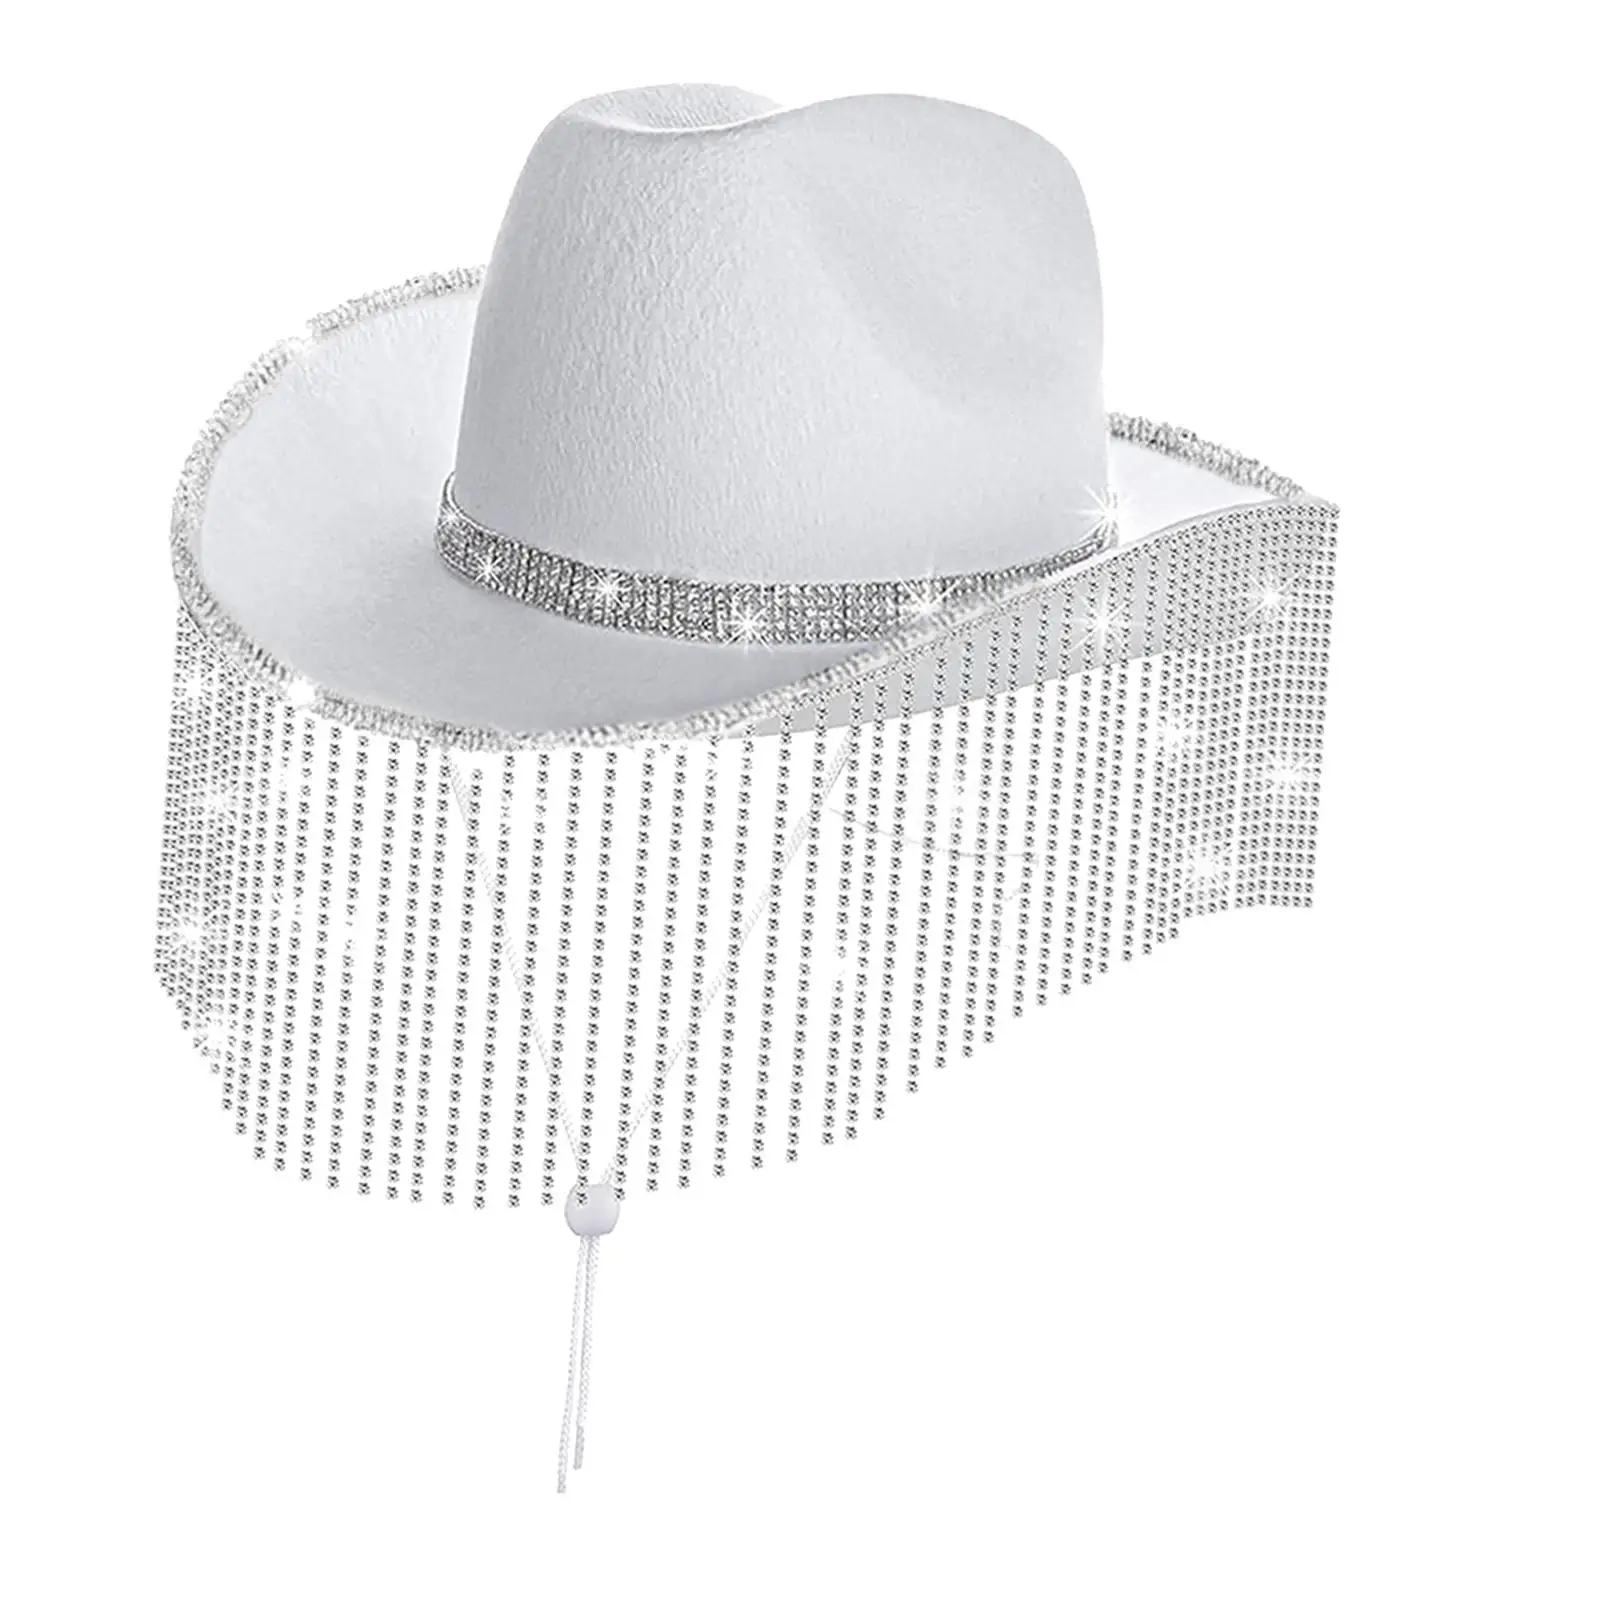  Hat Stylish Comfortable Durable Sunhat for Carnival Festivals Parties